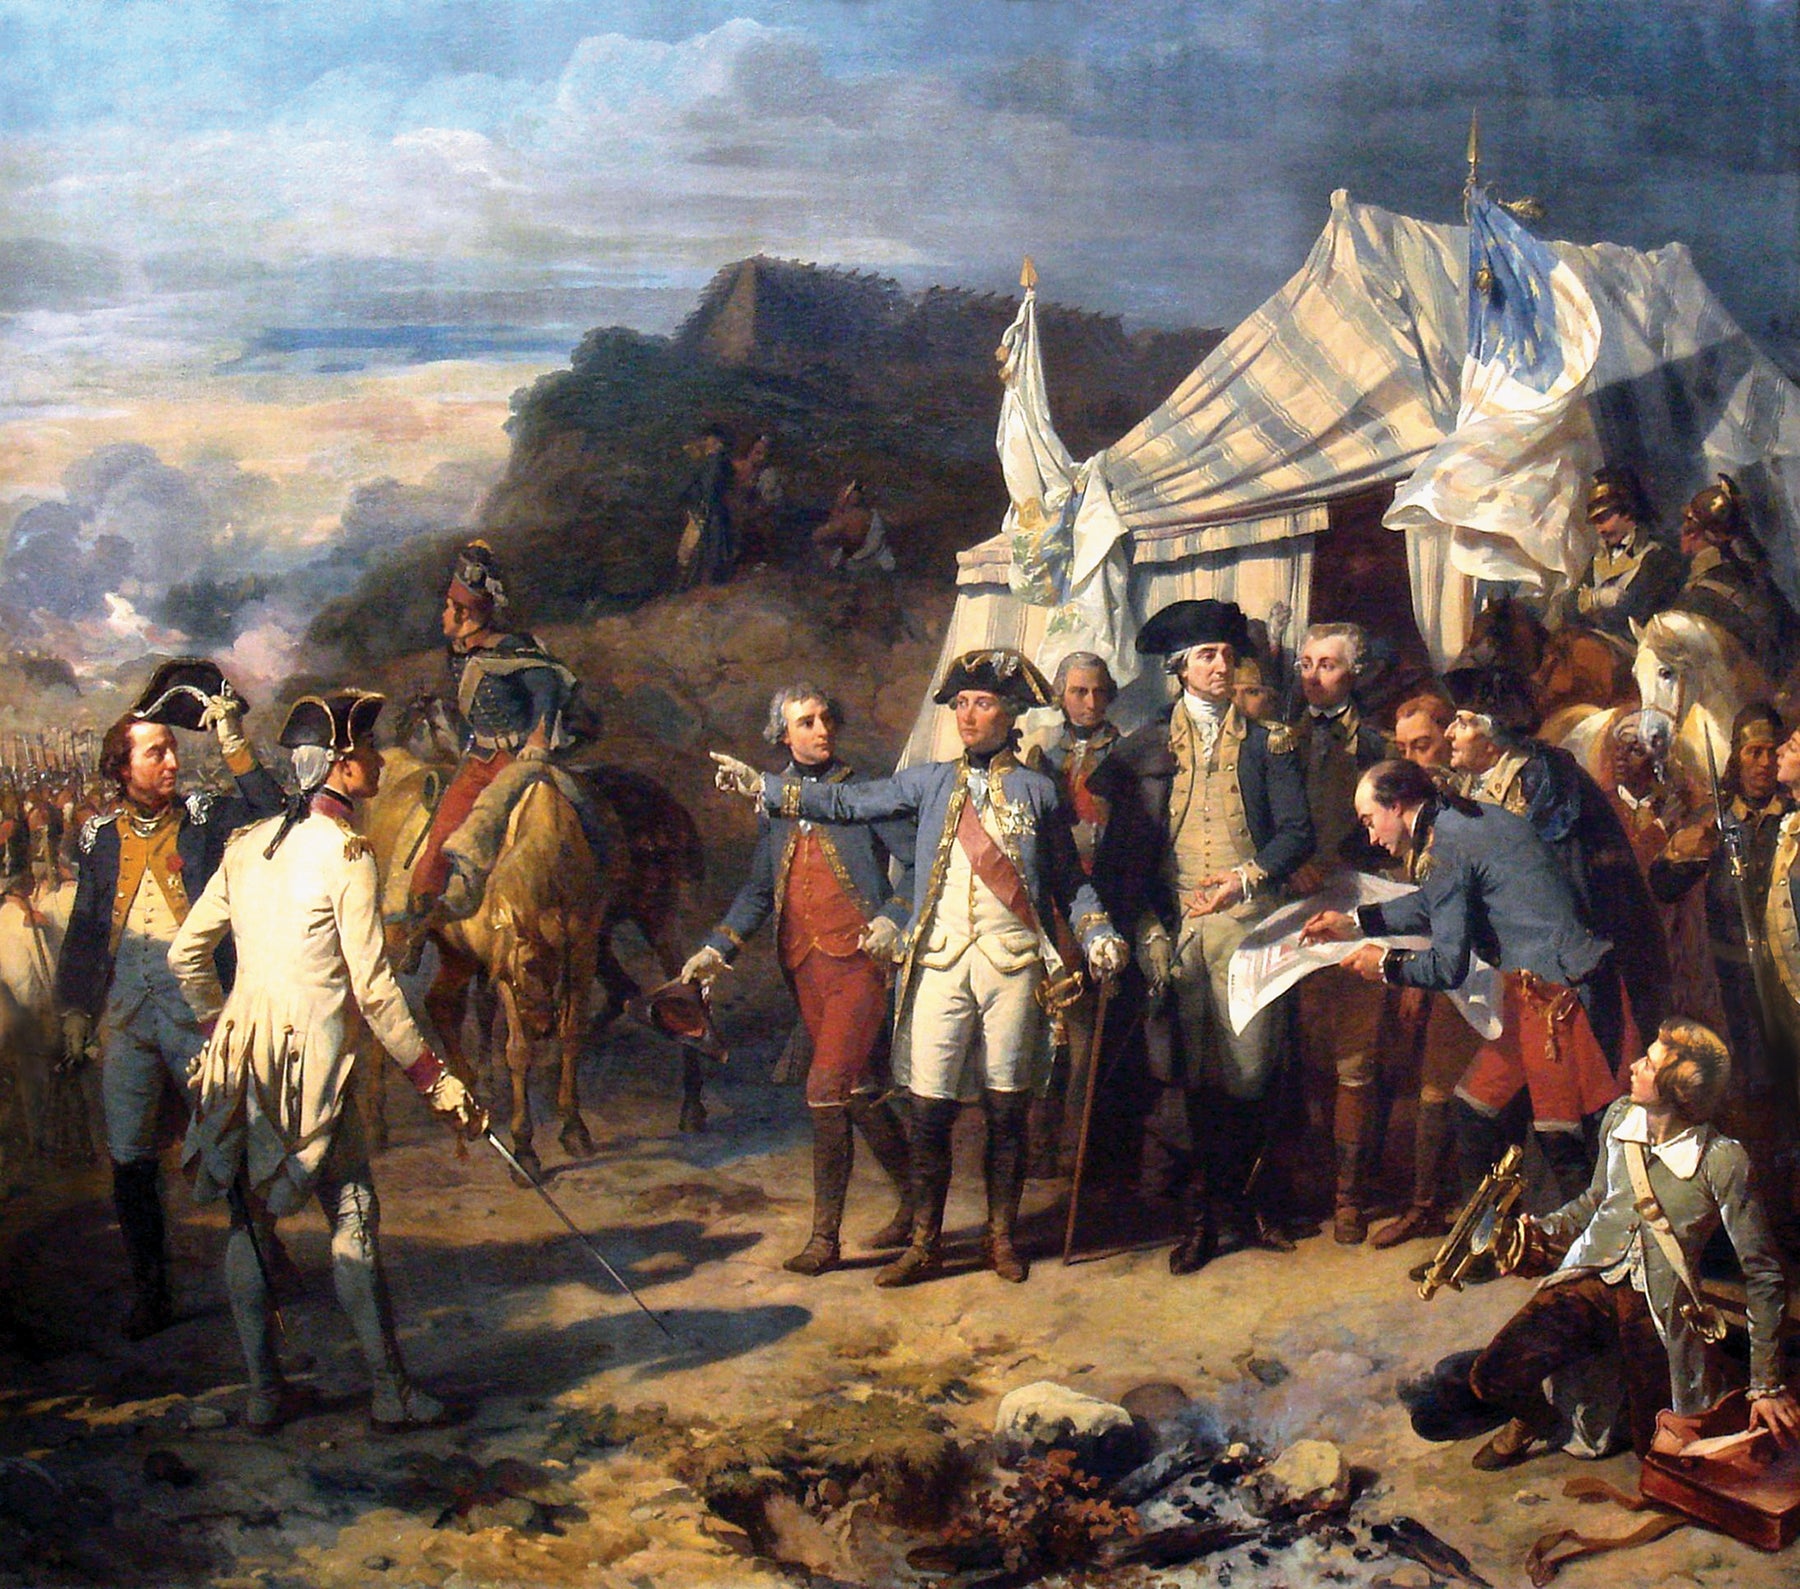 Gen. George Washington, center right, accepts the British surrender after the 1781 Battle of Yorktown, Virginia, in this 1836 painting by Auguste Couder that hangs in the Palace of Versailles near Paris. (Credit: Wikimedia Commons)